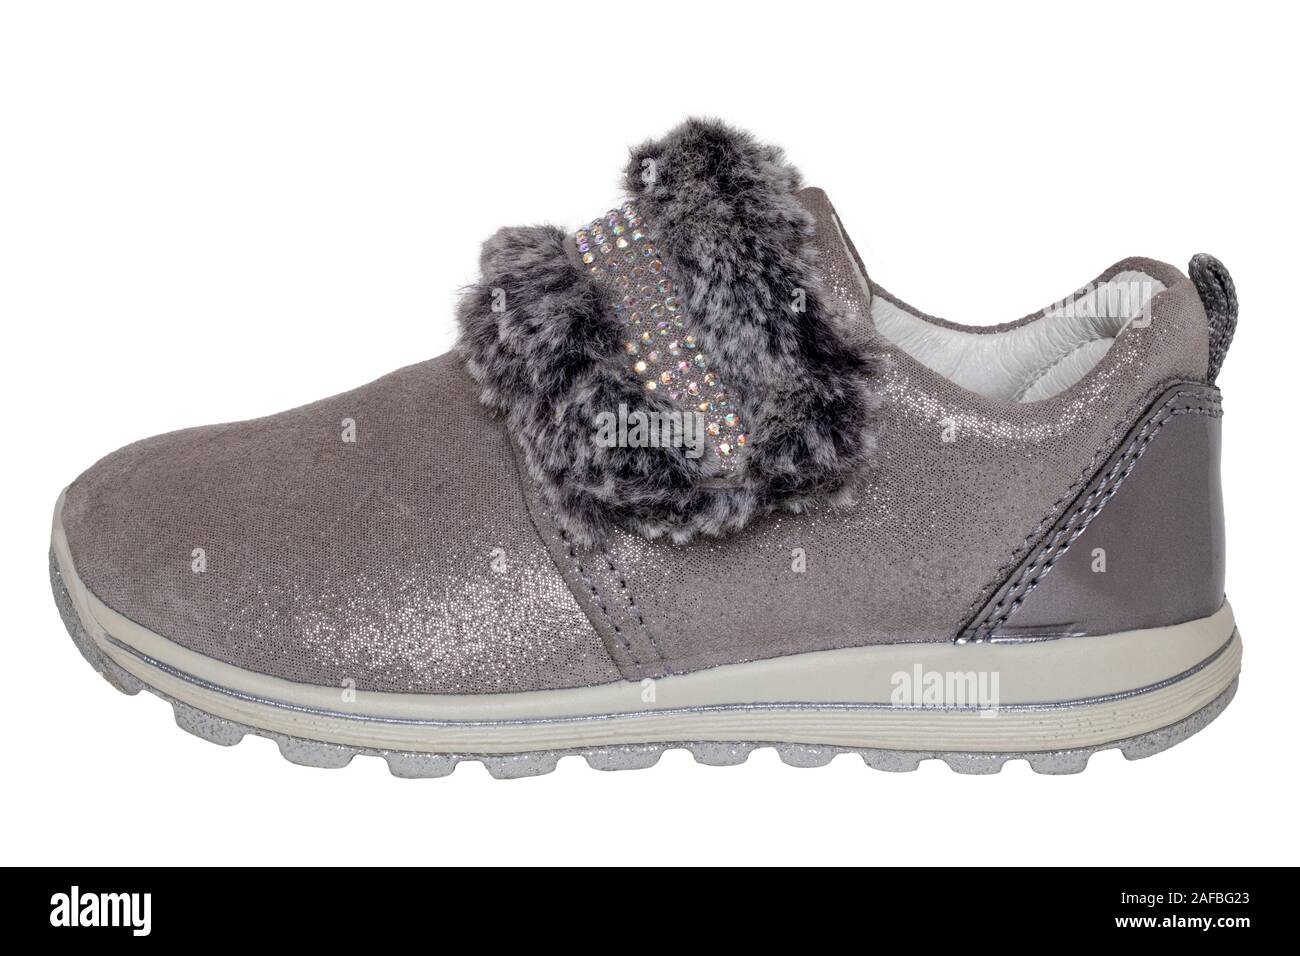 Child shoes fashion. Close-up of a single beautiful gray silver suede sneaker or sports shoe for girls with fur and rhinestone decoration isolated on Stock Photo